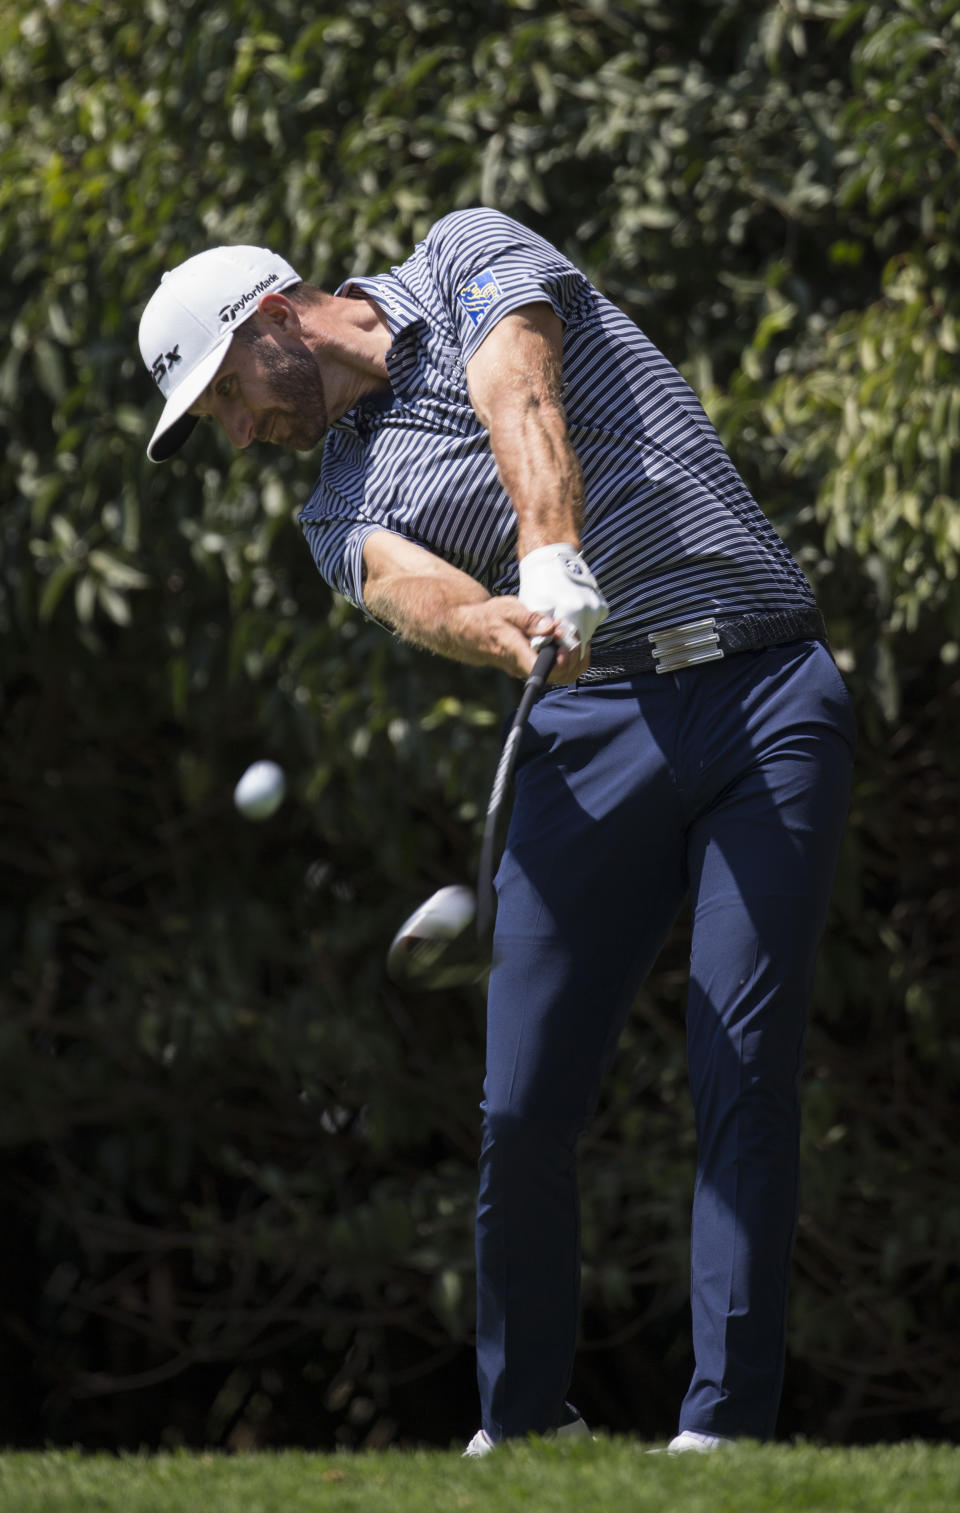 U.S. golfer Dustin Johnson chips the ball into the second hole during the WGC-Mexico Championship at the Chapultepec Golf Club in Mexico City, Sunday, Feb. 24, 2019. (AP Photo/Christian Palma)